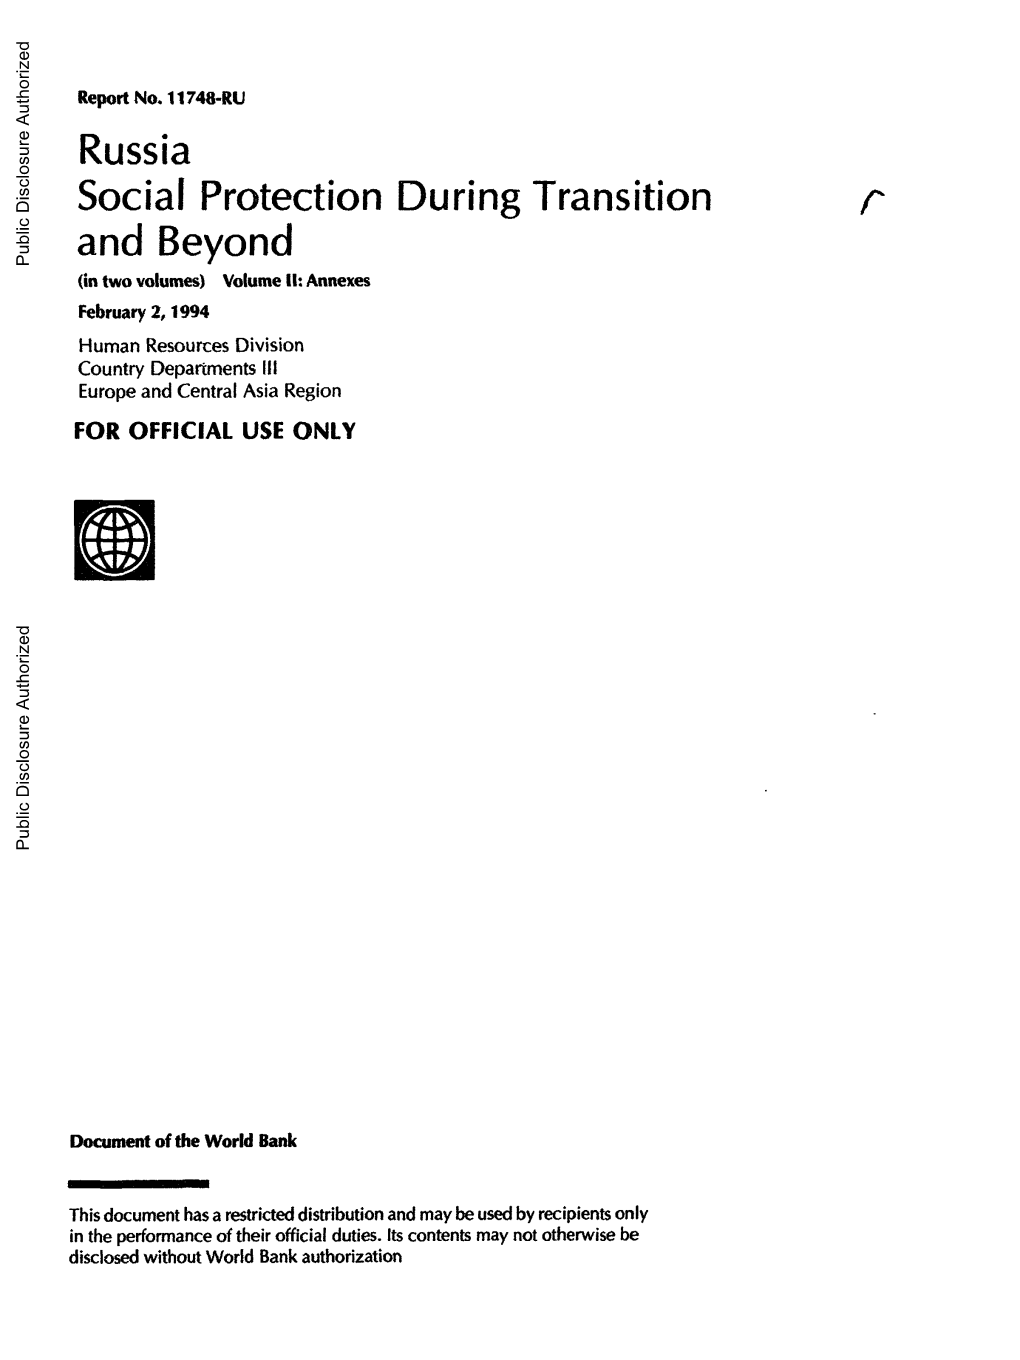 Russia Social Protection During Transition